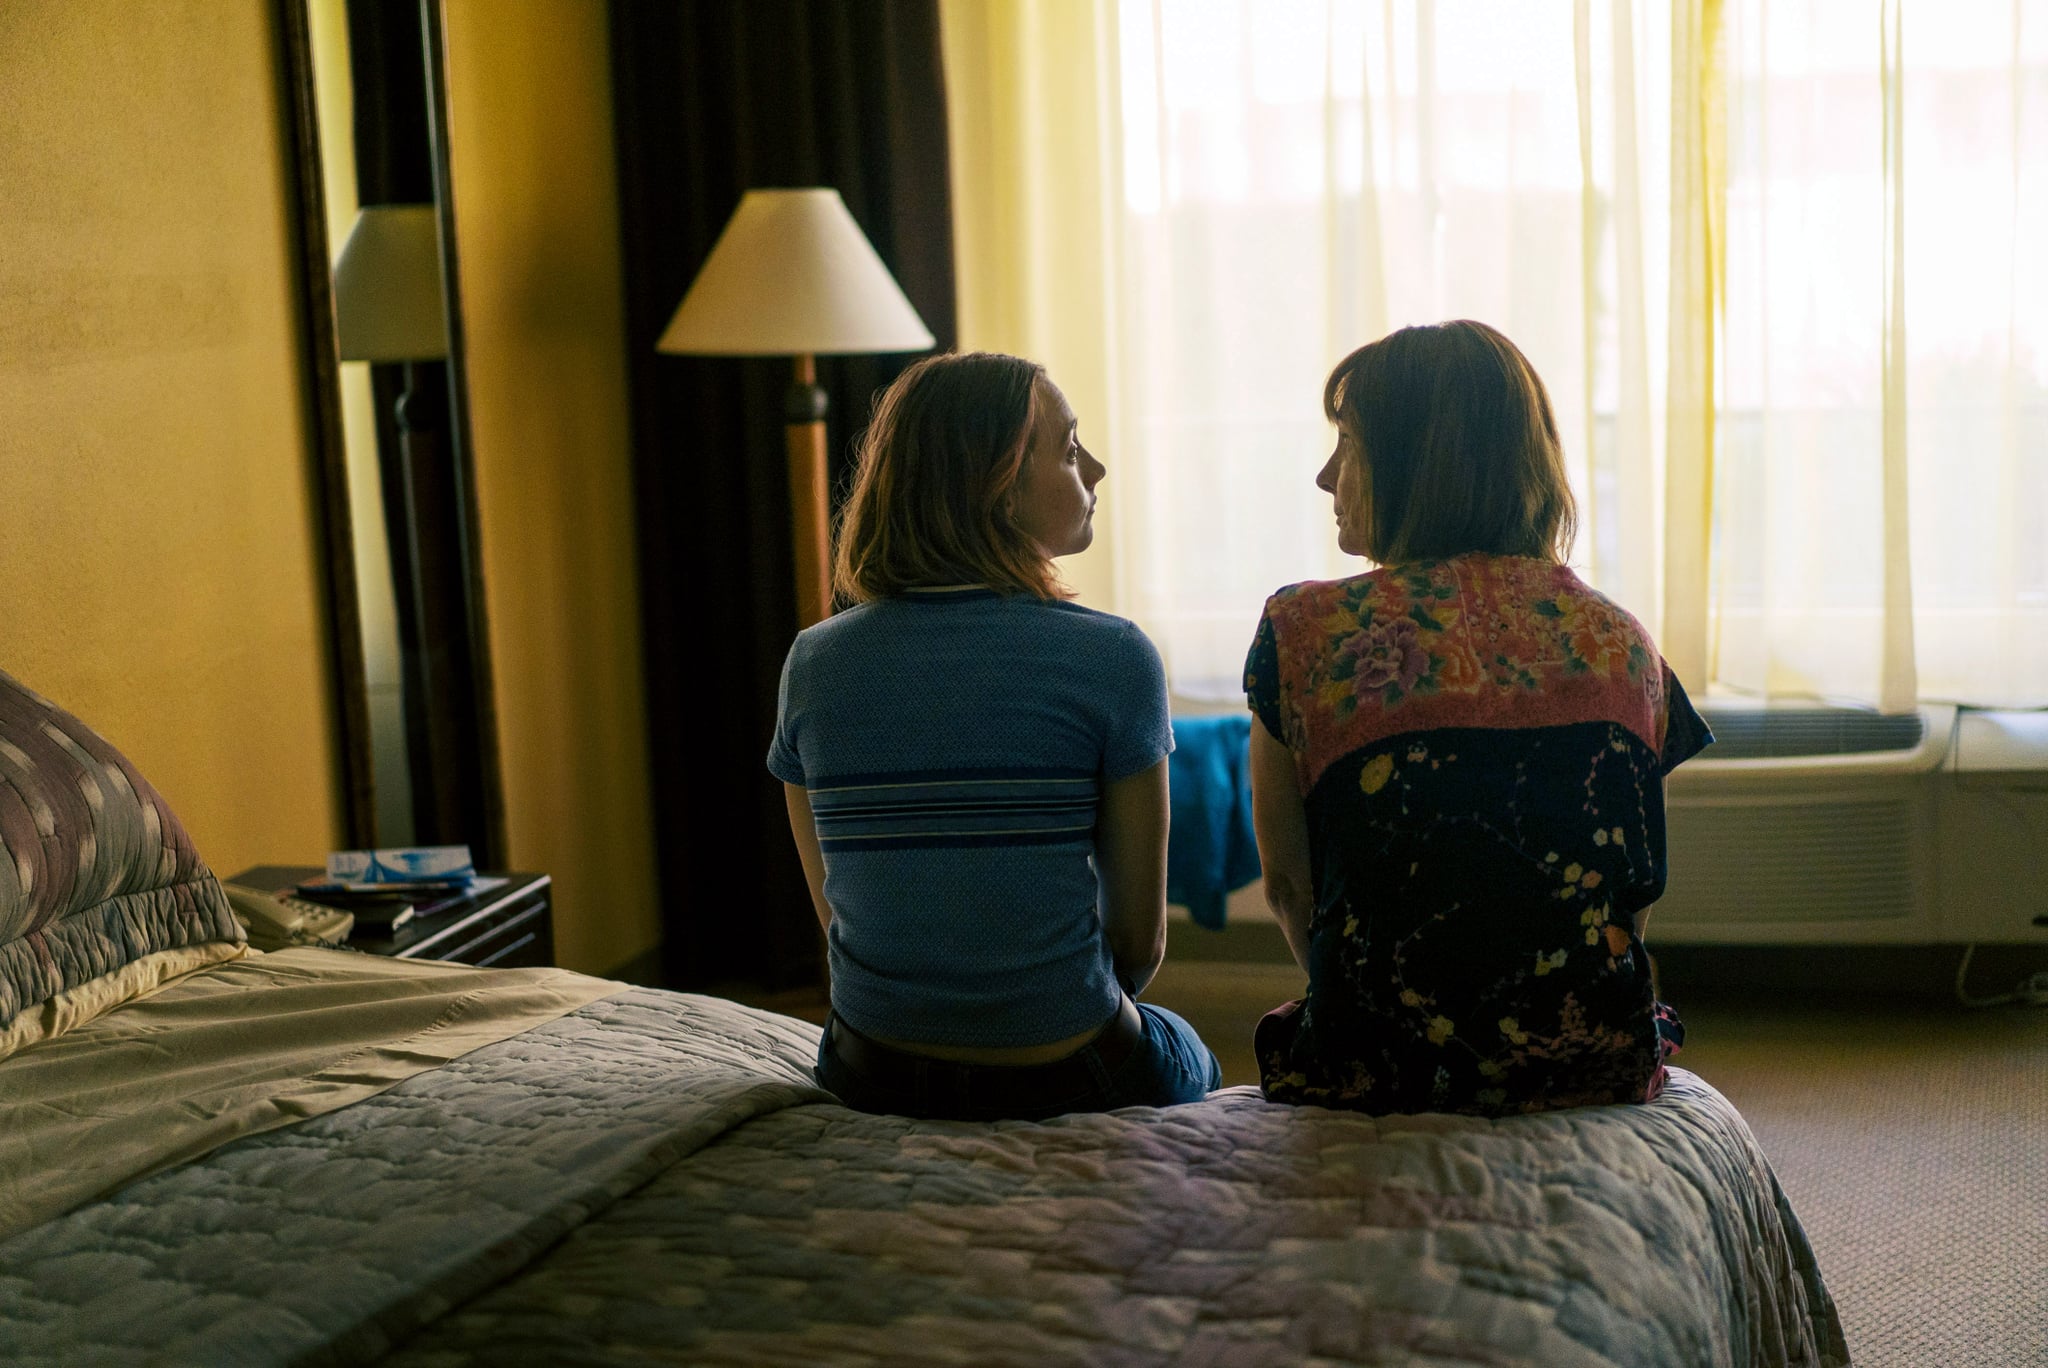 LADY BIRD, from left, Saoirse Ronan, Laurie Metcalf, 2017. A24/courtesy Everett Collection